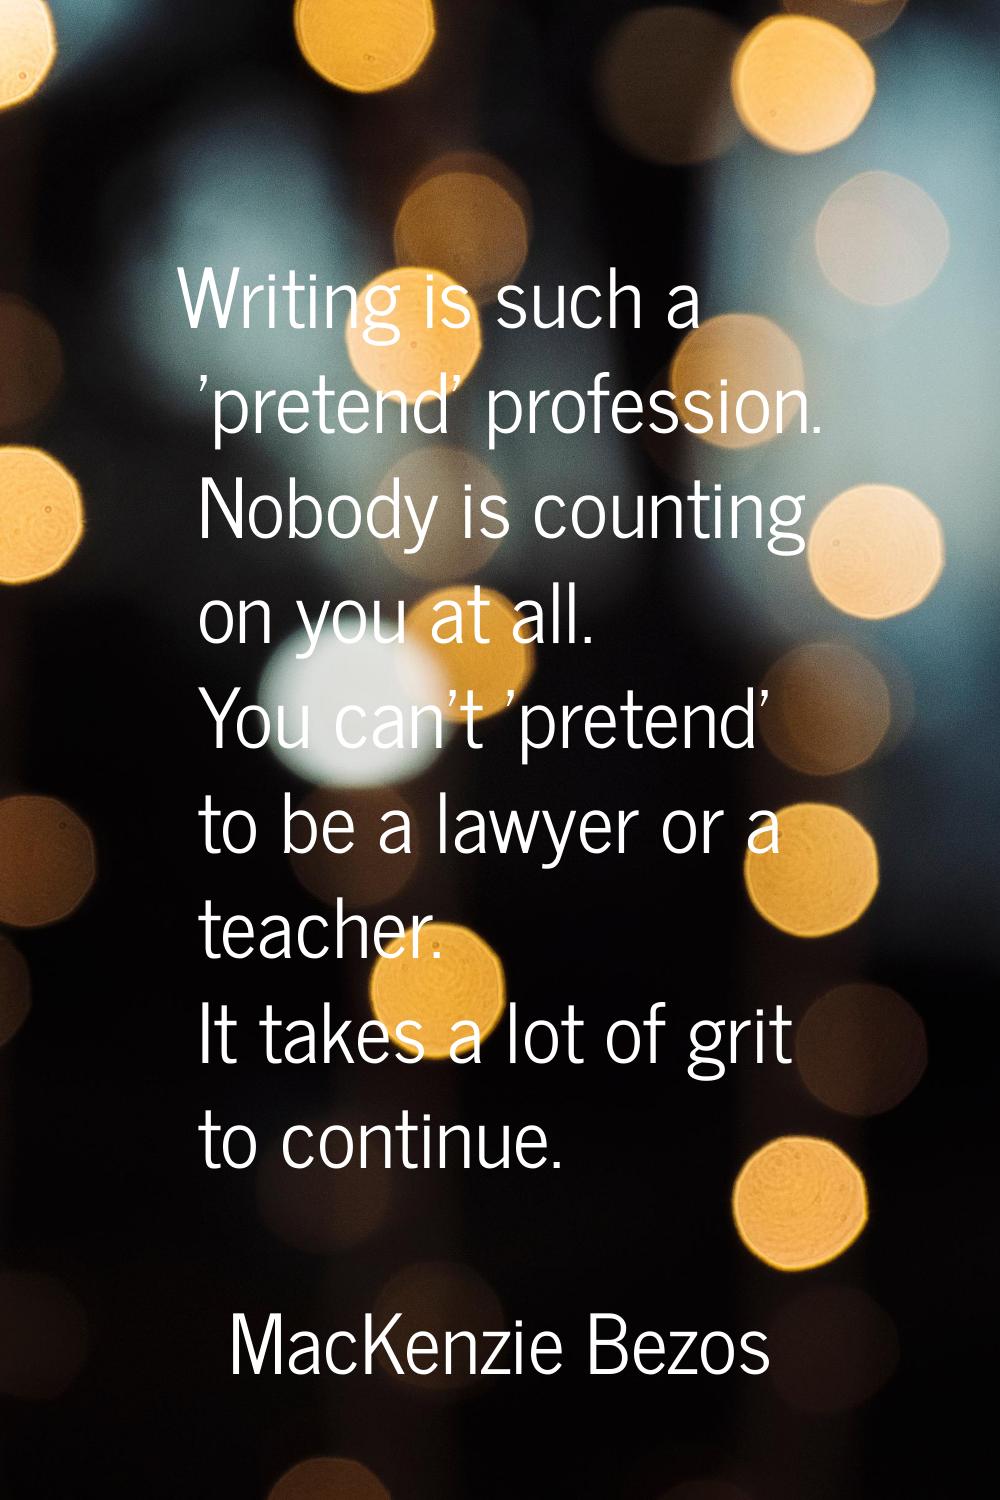 Writing is such a 'pretend' profession. Nobody is counting on you at all. You can't 'pretend' to be